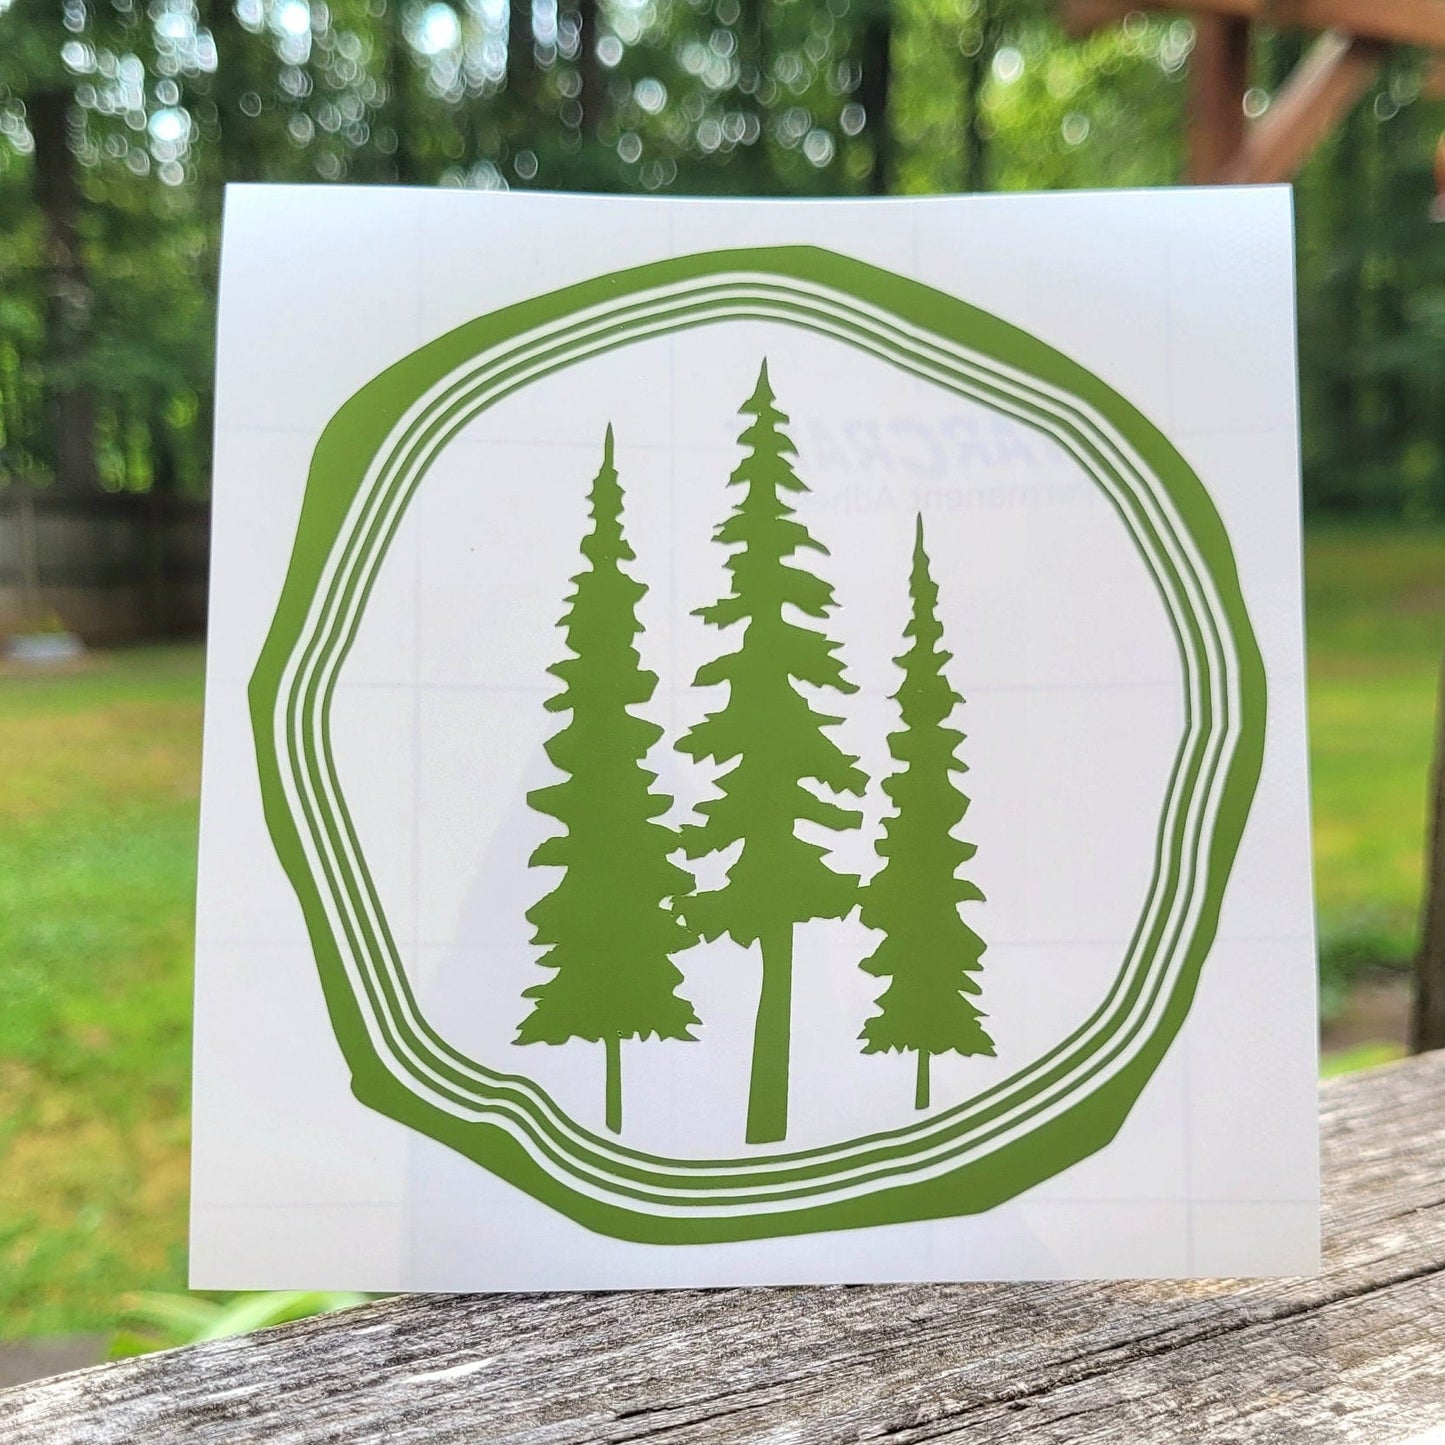 Trees Forest Vinyl Transfer Decal Sticker for Car, Truck, Camper, RV, Van, window, laptop, cup. Multiple Colors offered and large sizes.